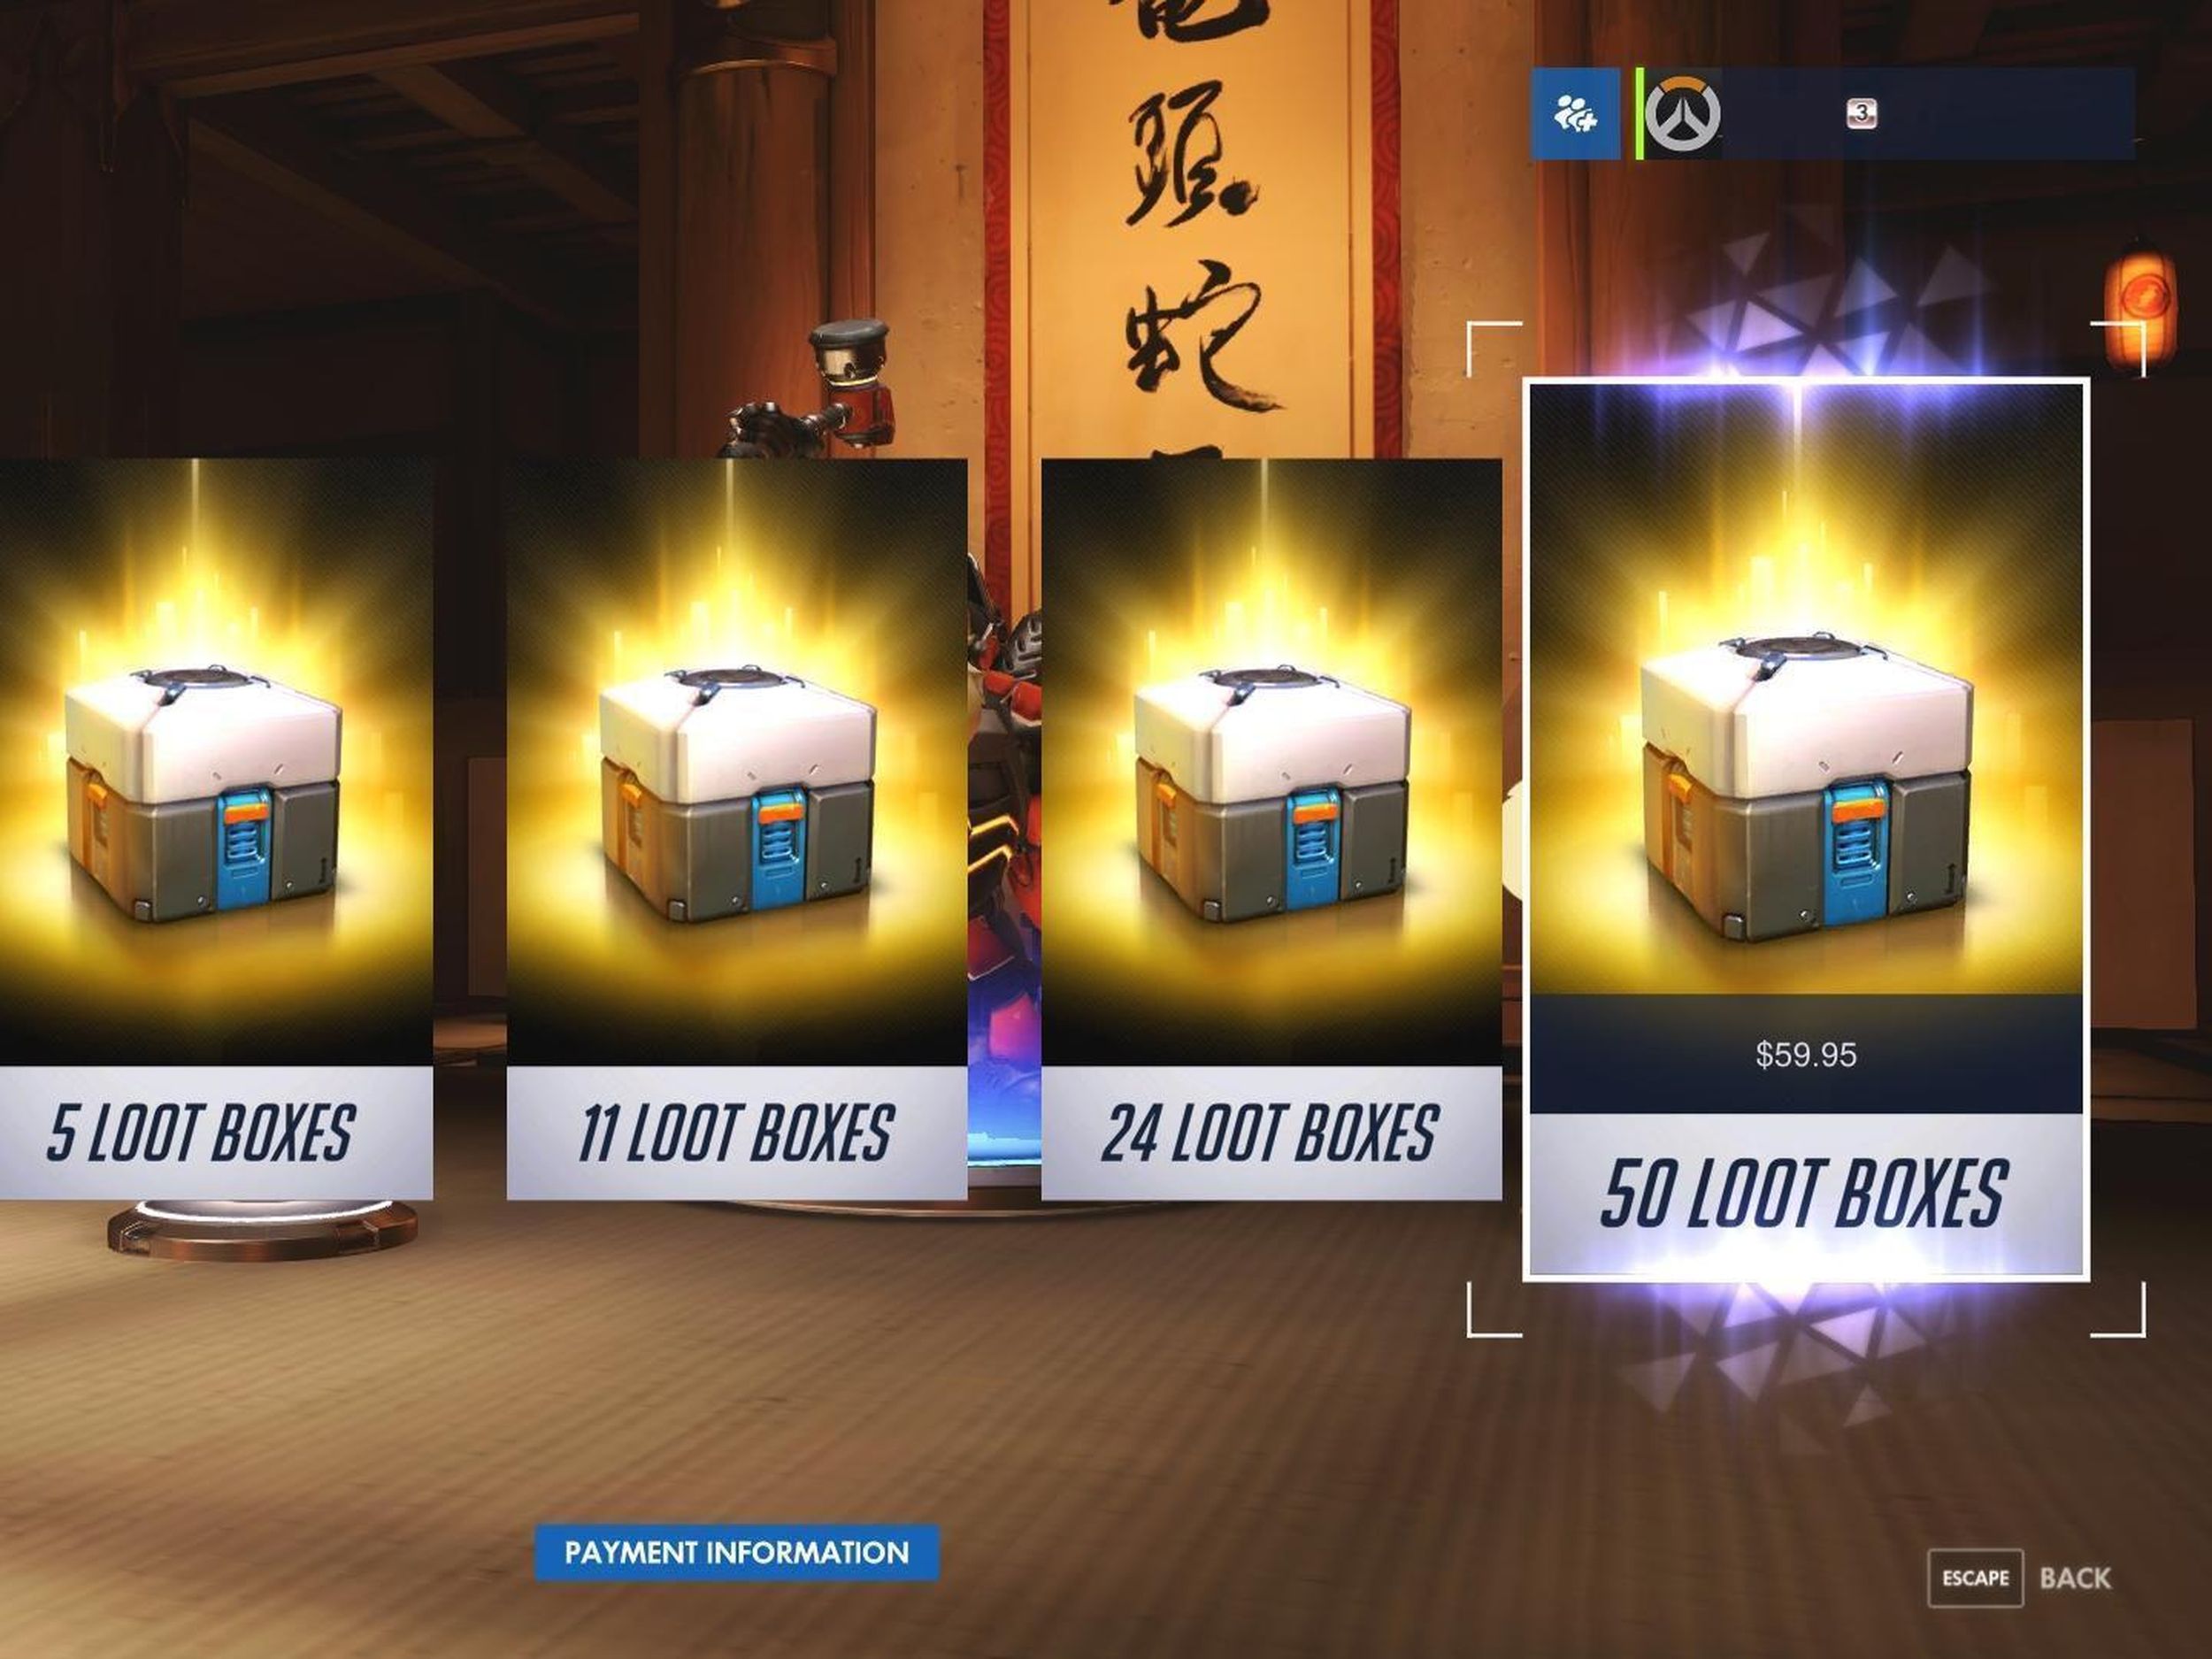 BoxBox comments on 'infinite cycle' of microtransactions in games like League  of Legends - Dot Esports